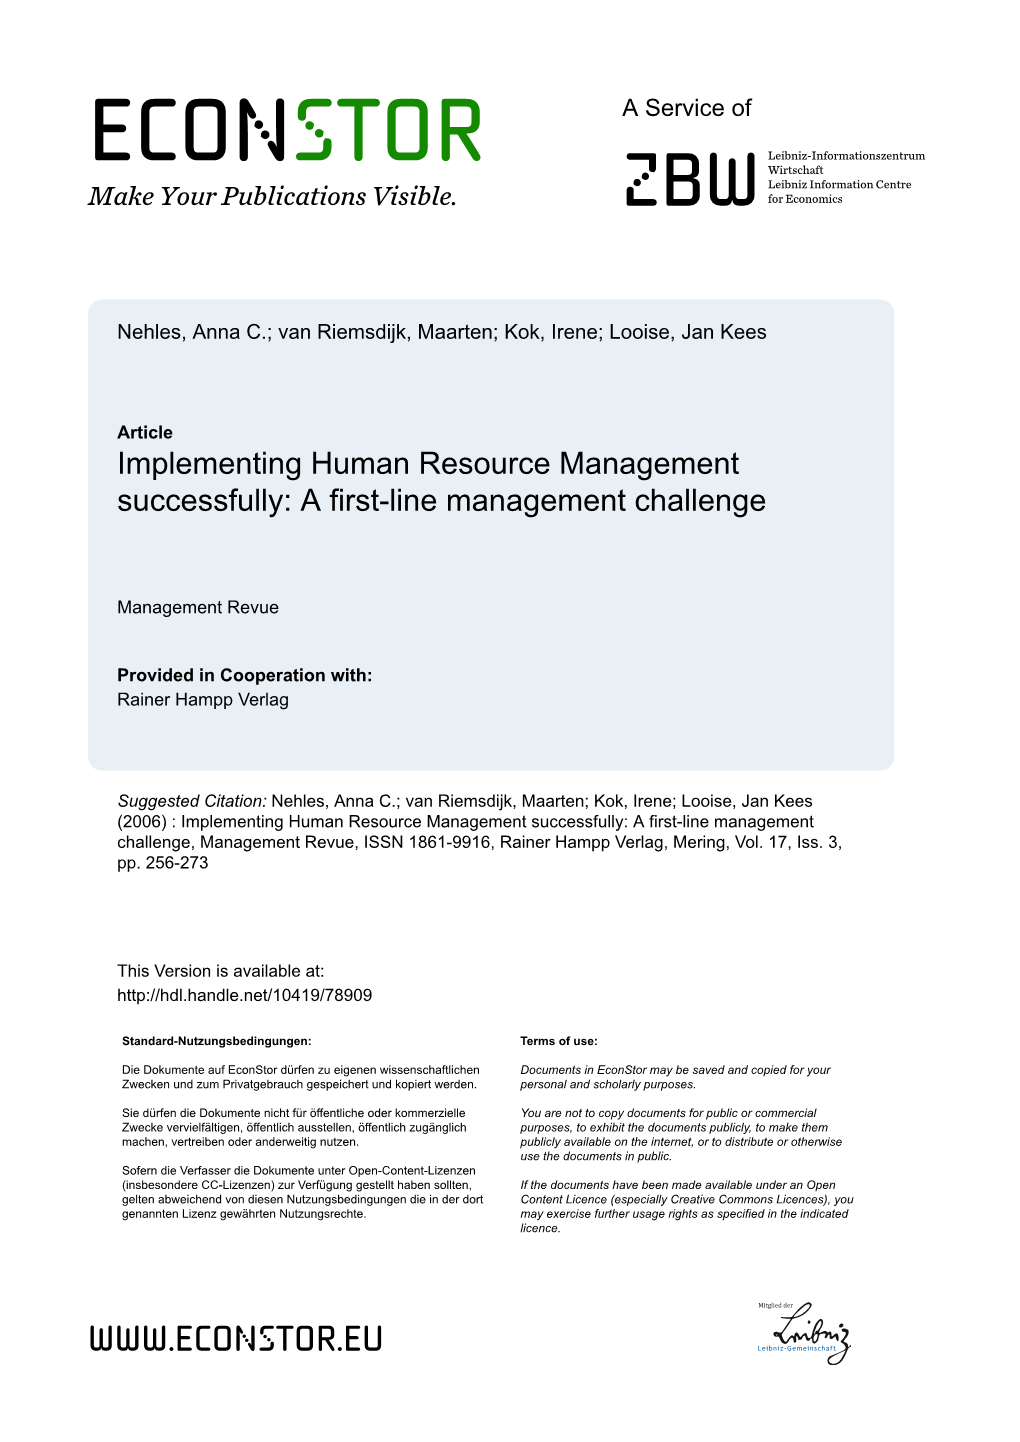 Implementing Human Resource Management Successfully: a First-Line Management Challenge